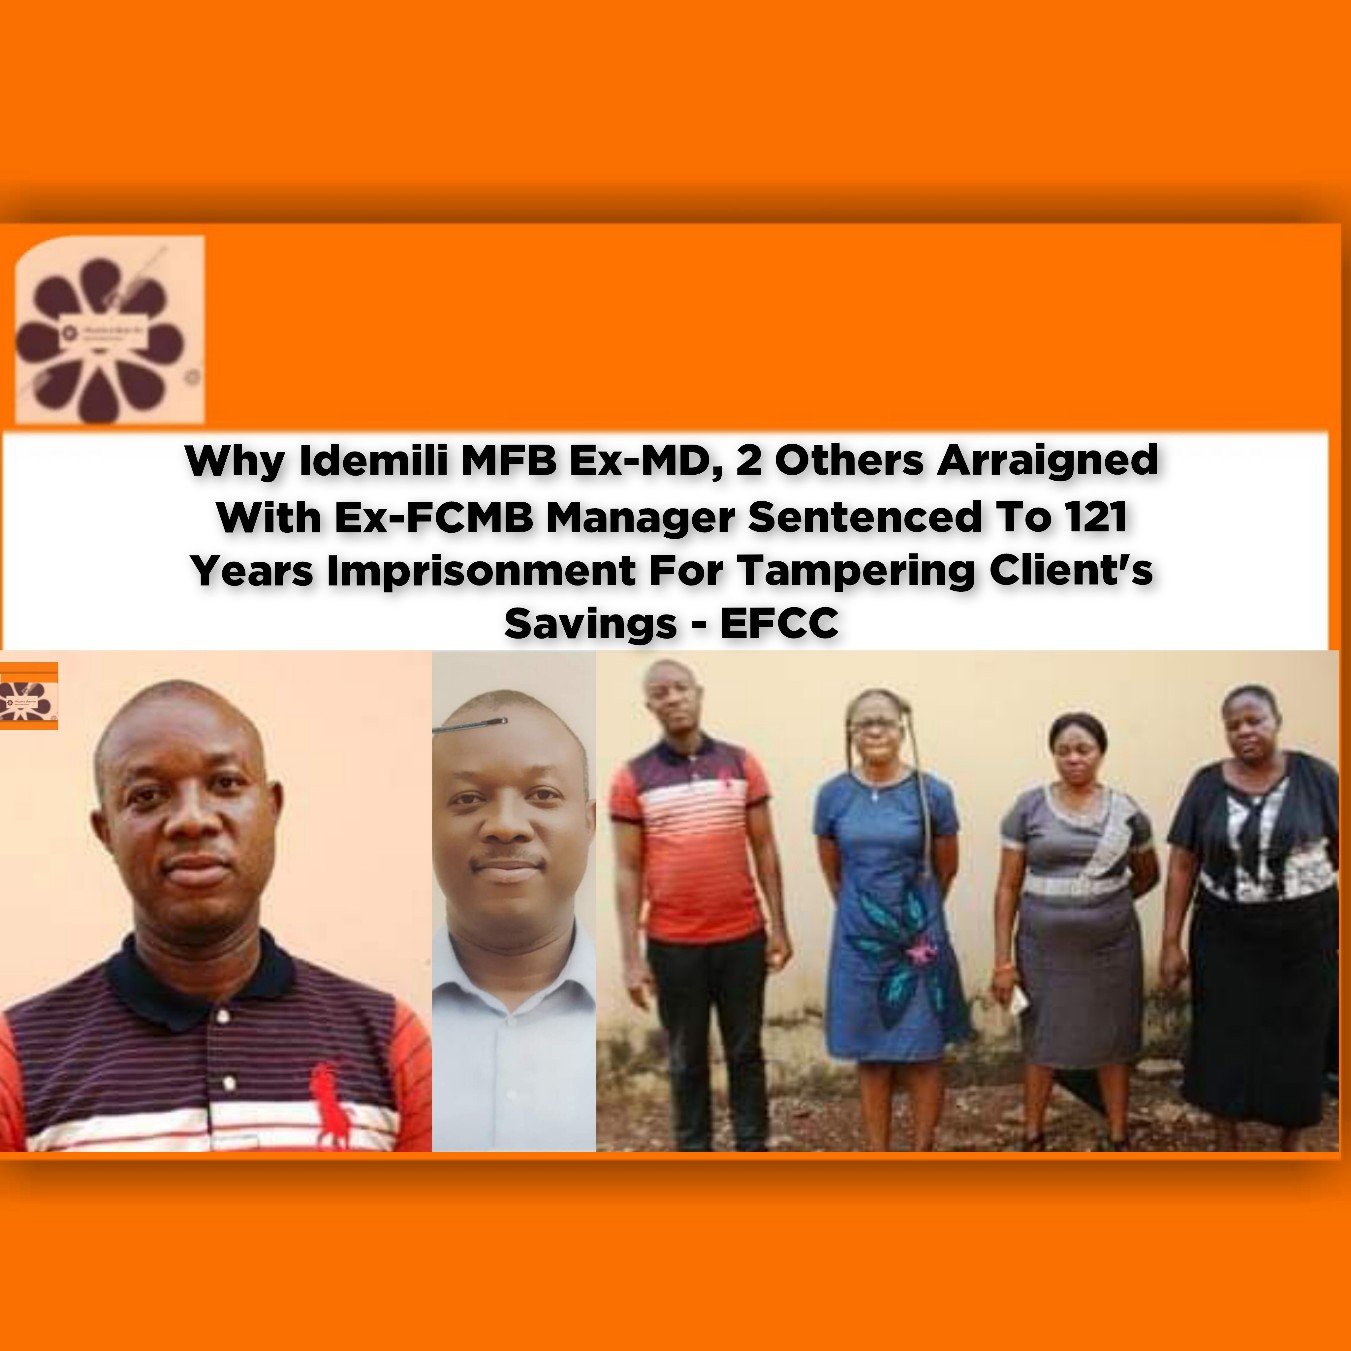 Why Idemili MFB Ex-MD, 2 Others Arraigned With Ex-FCMB Manager Sentenced To 121 Years Imprisonment For Tampering Client's Savings - EFCC ~ OsazuwaAkonedo #Goodwin